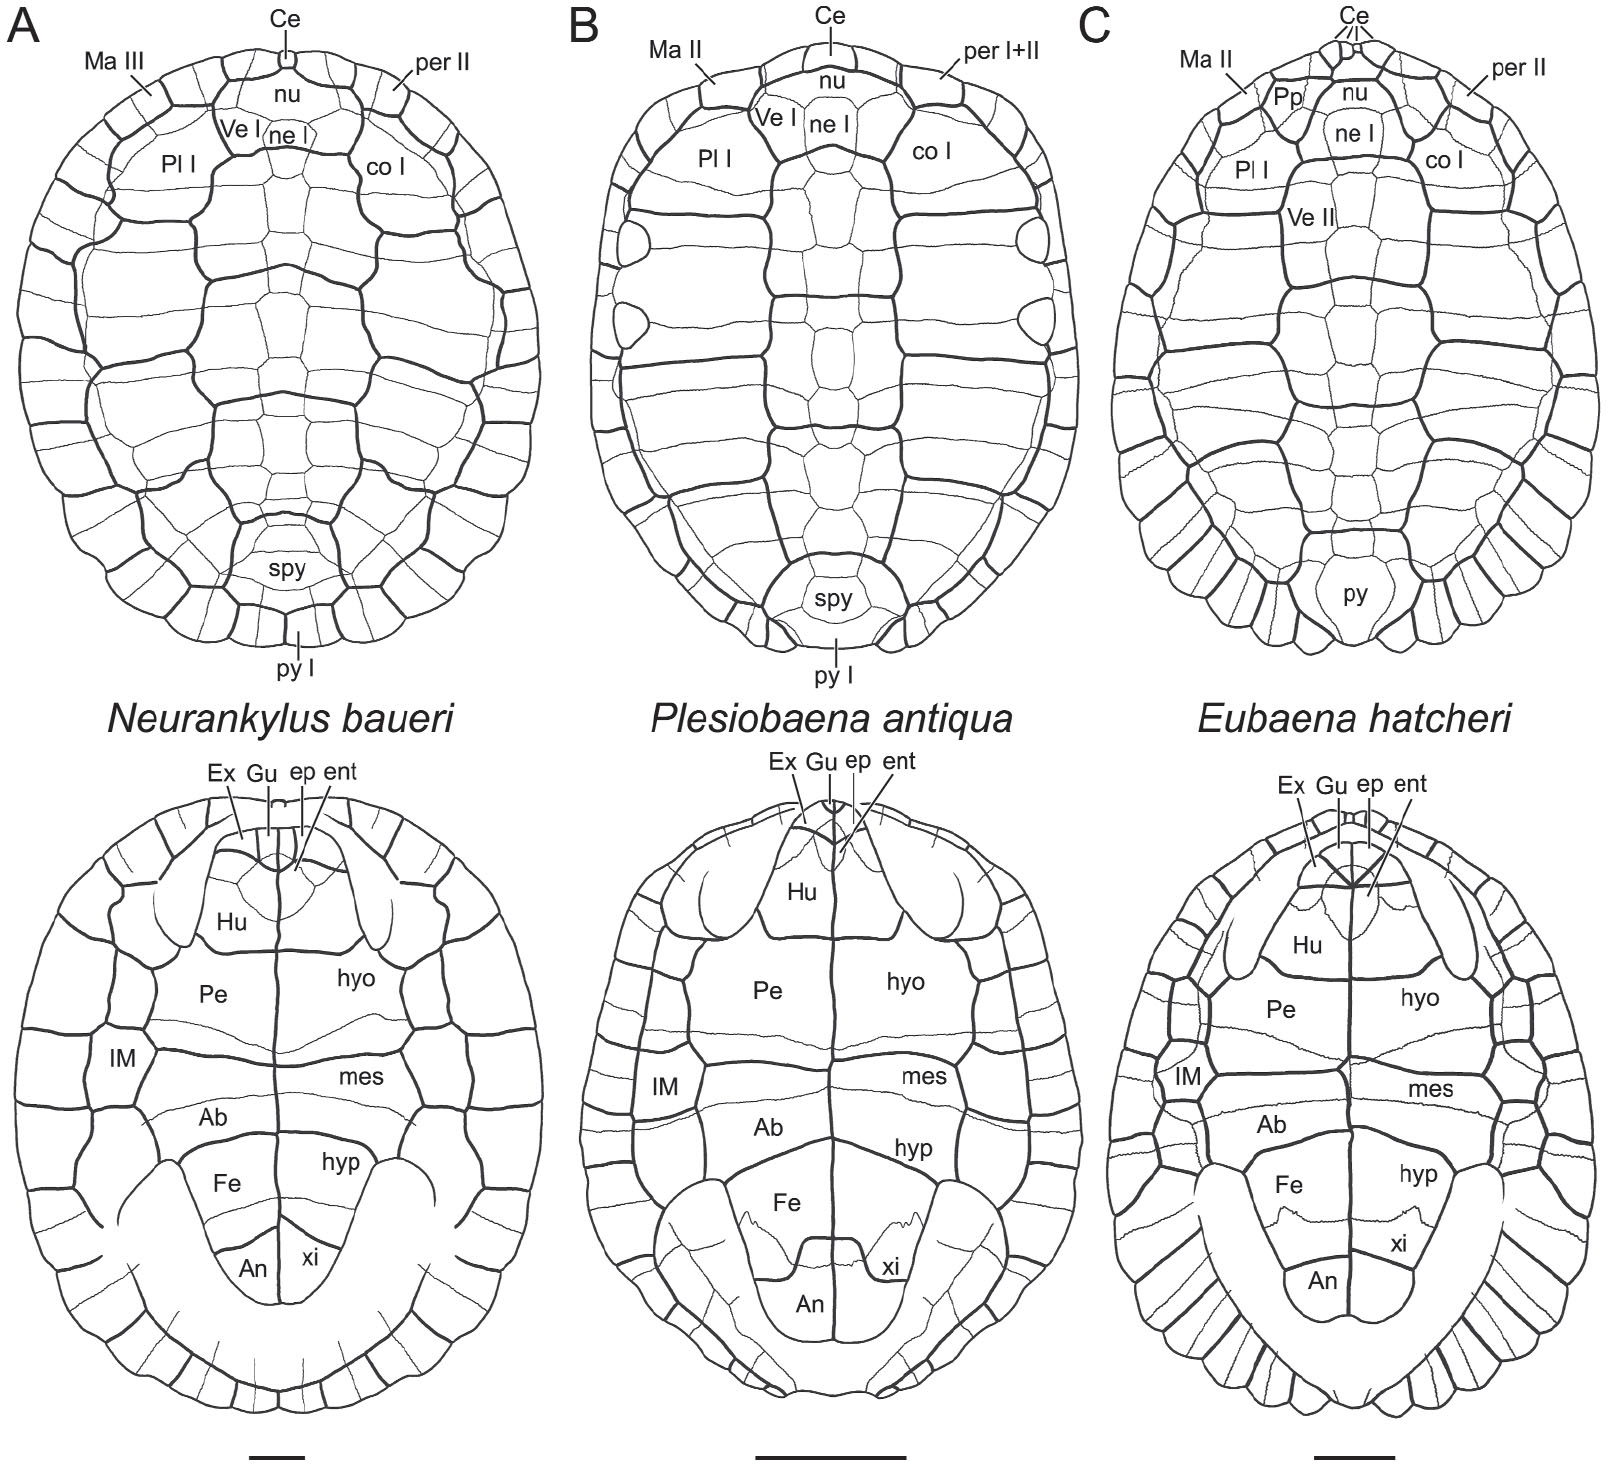 A Review of the Fossil Record of Turtles of the Clade Baenidae